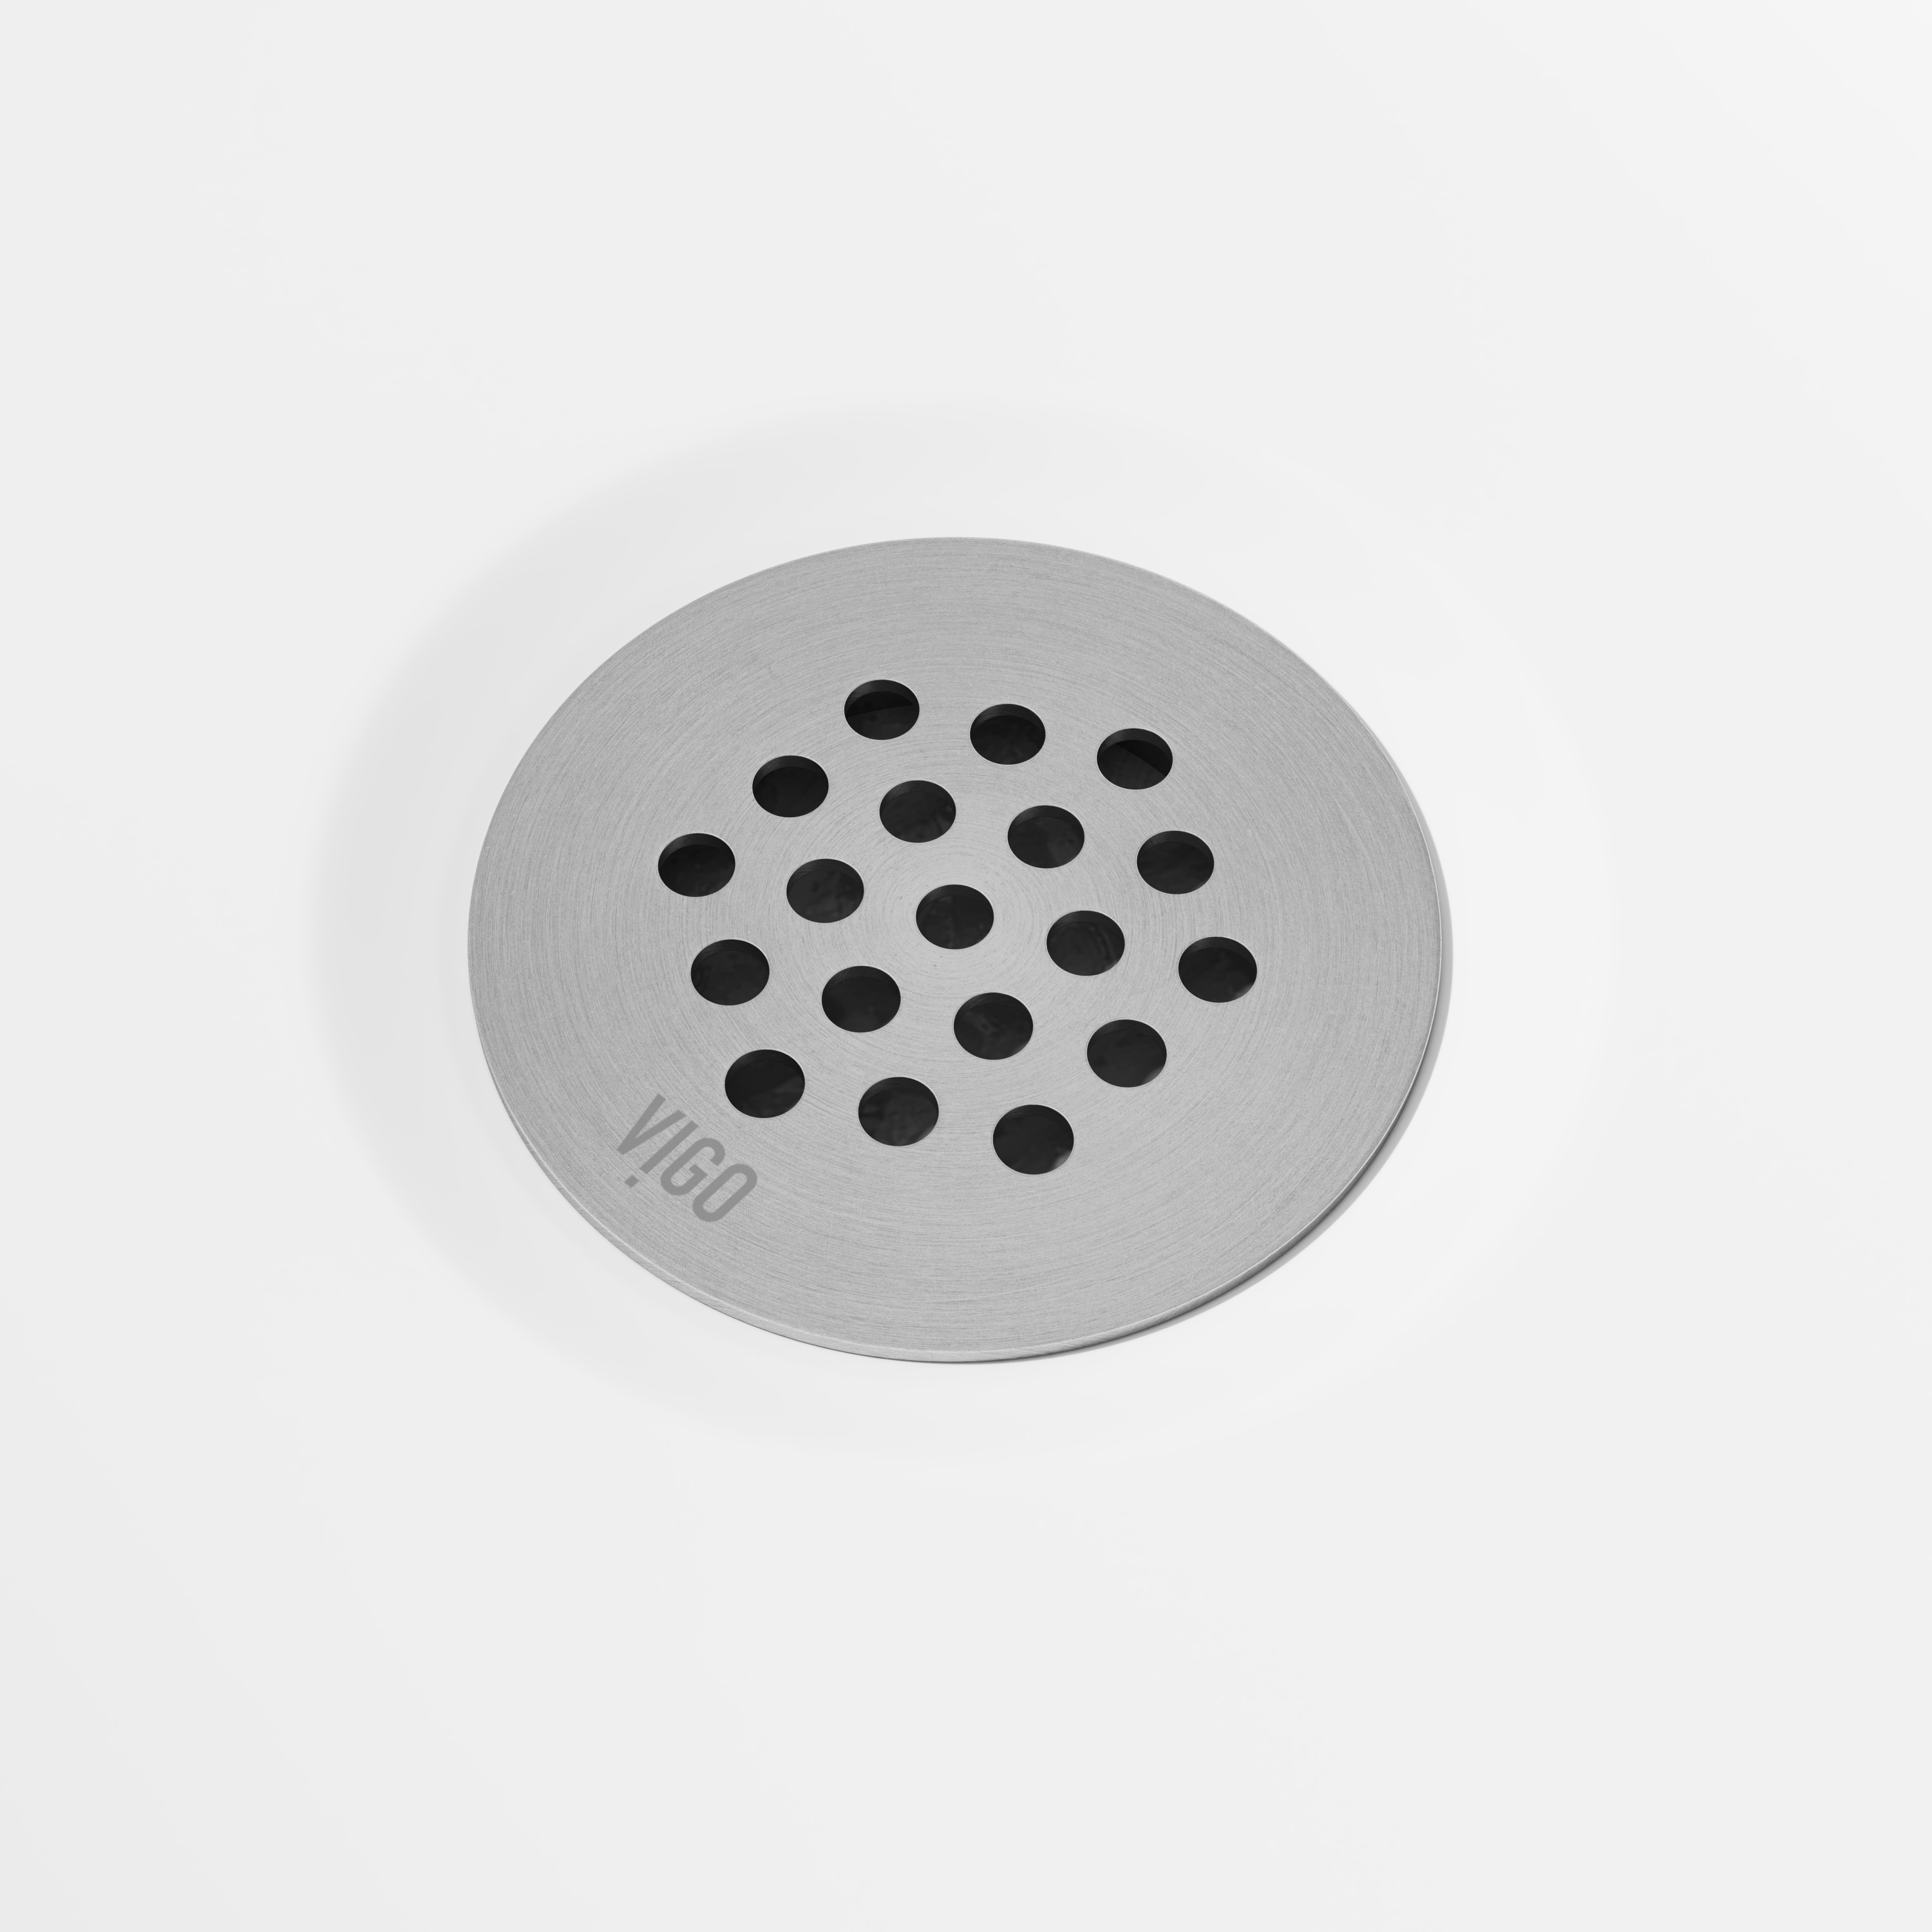 ABS Matte Black Linear Shower Drain with Oval Grate